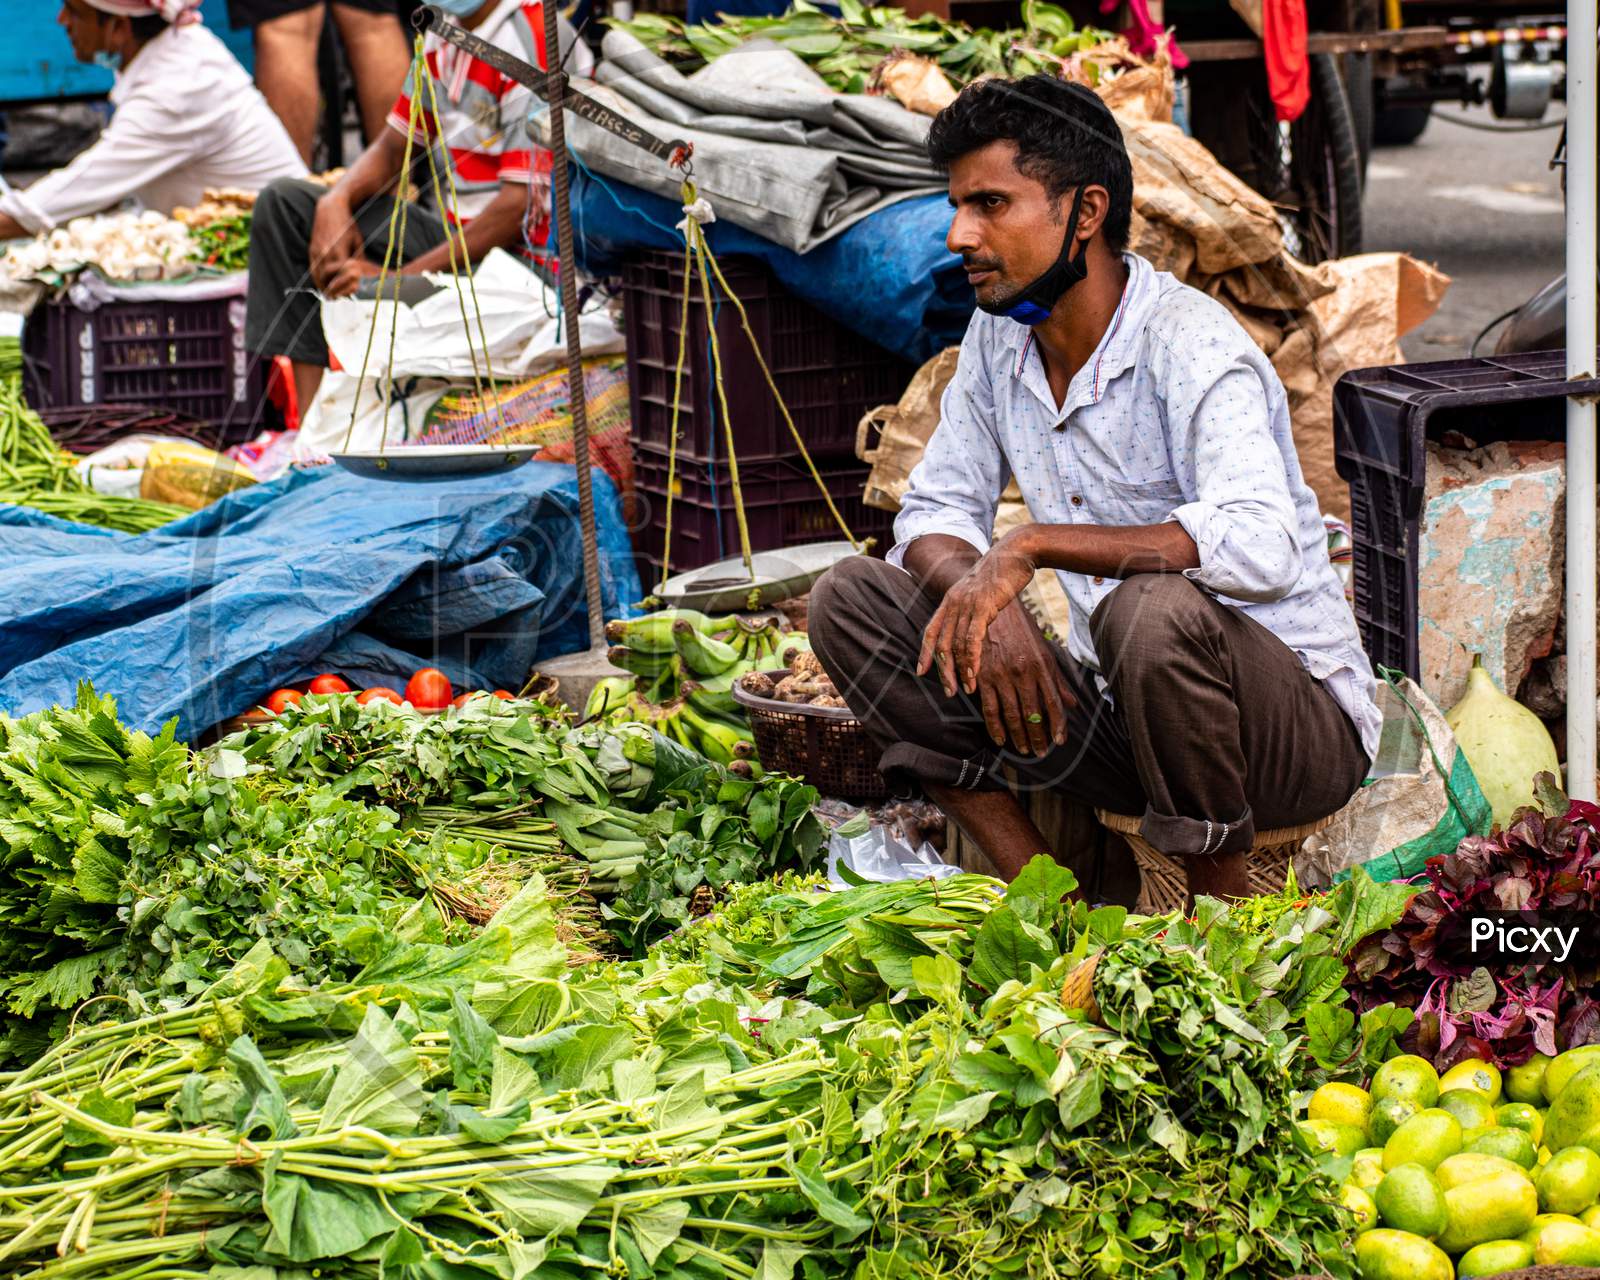 An unidentified vendor selling vegetables in weekly market